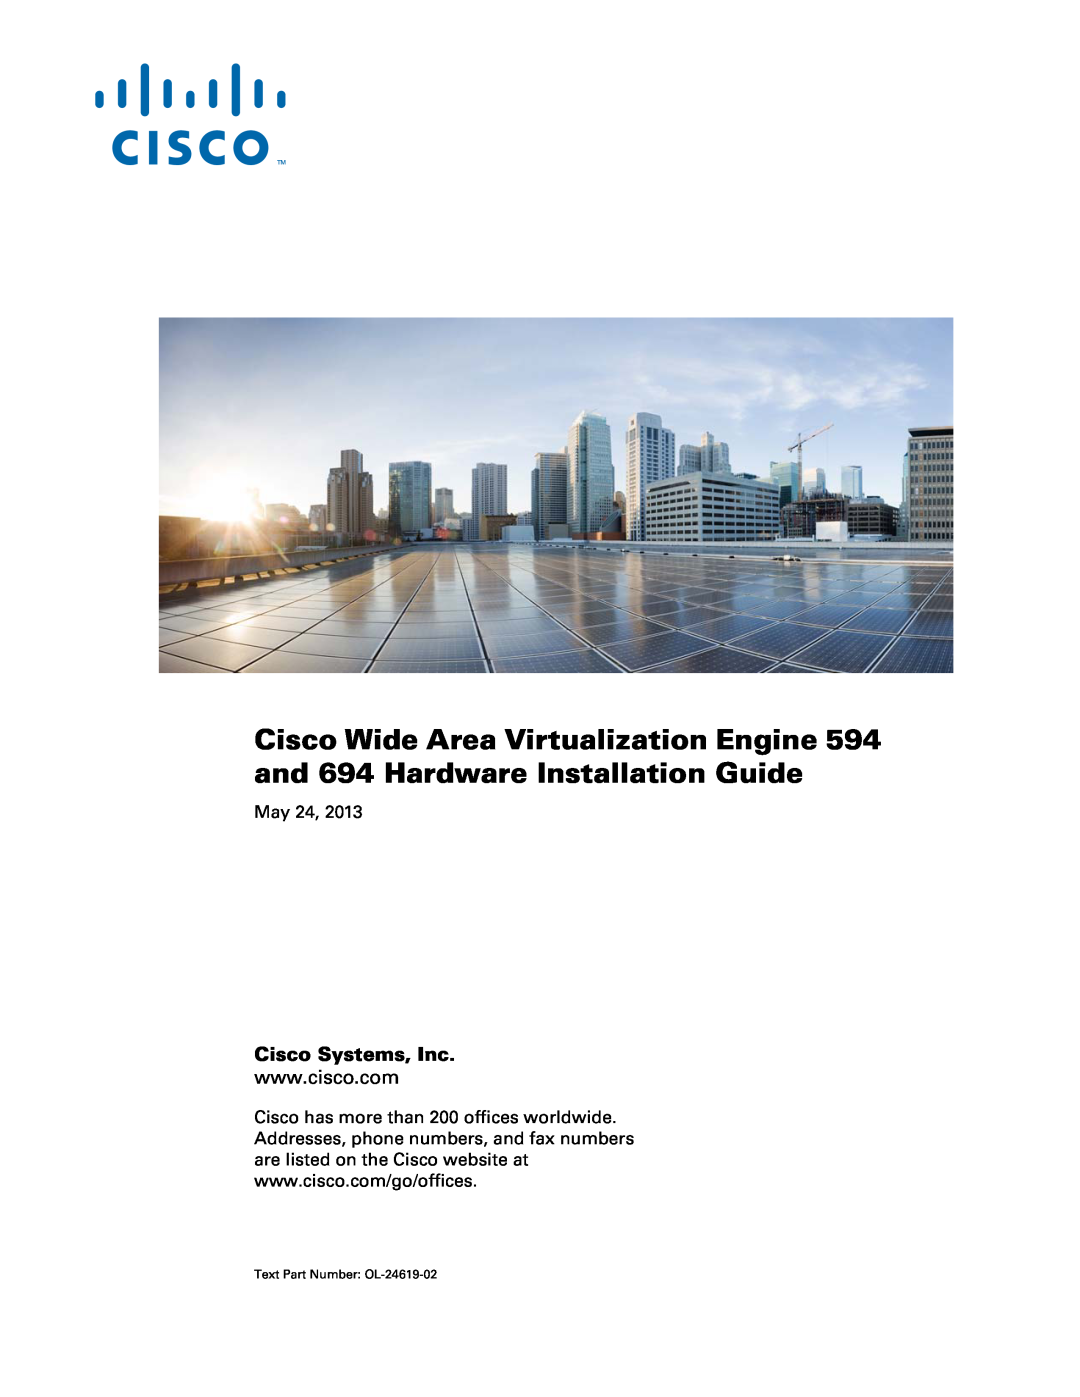 Cisco Systems 694, WAVE594K9 manual Cisco Systems, Inc, May 24, Text Part Number OL-24619-02 